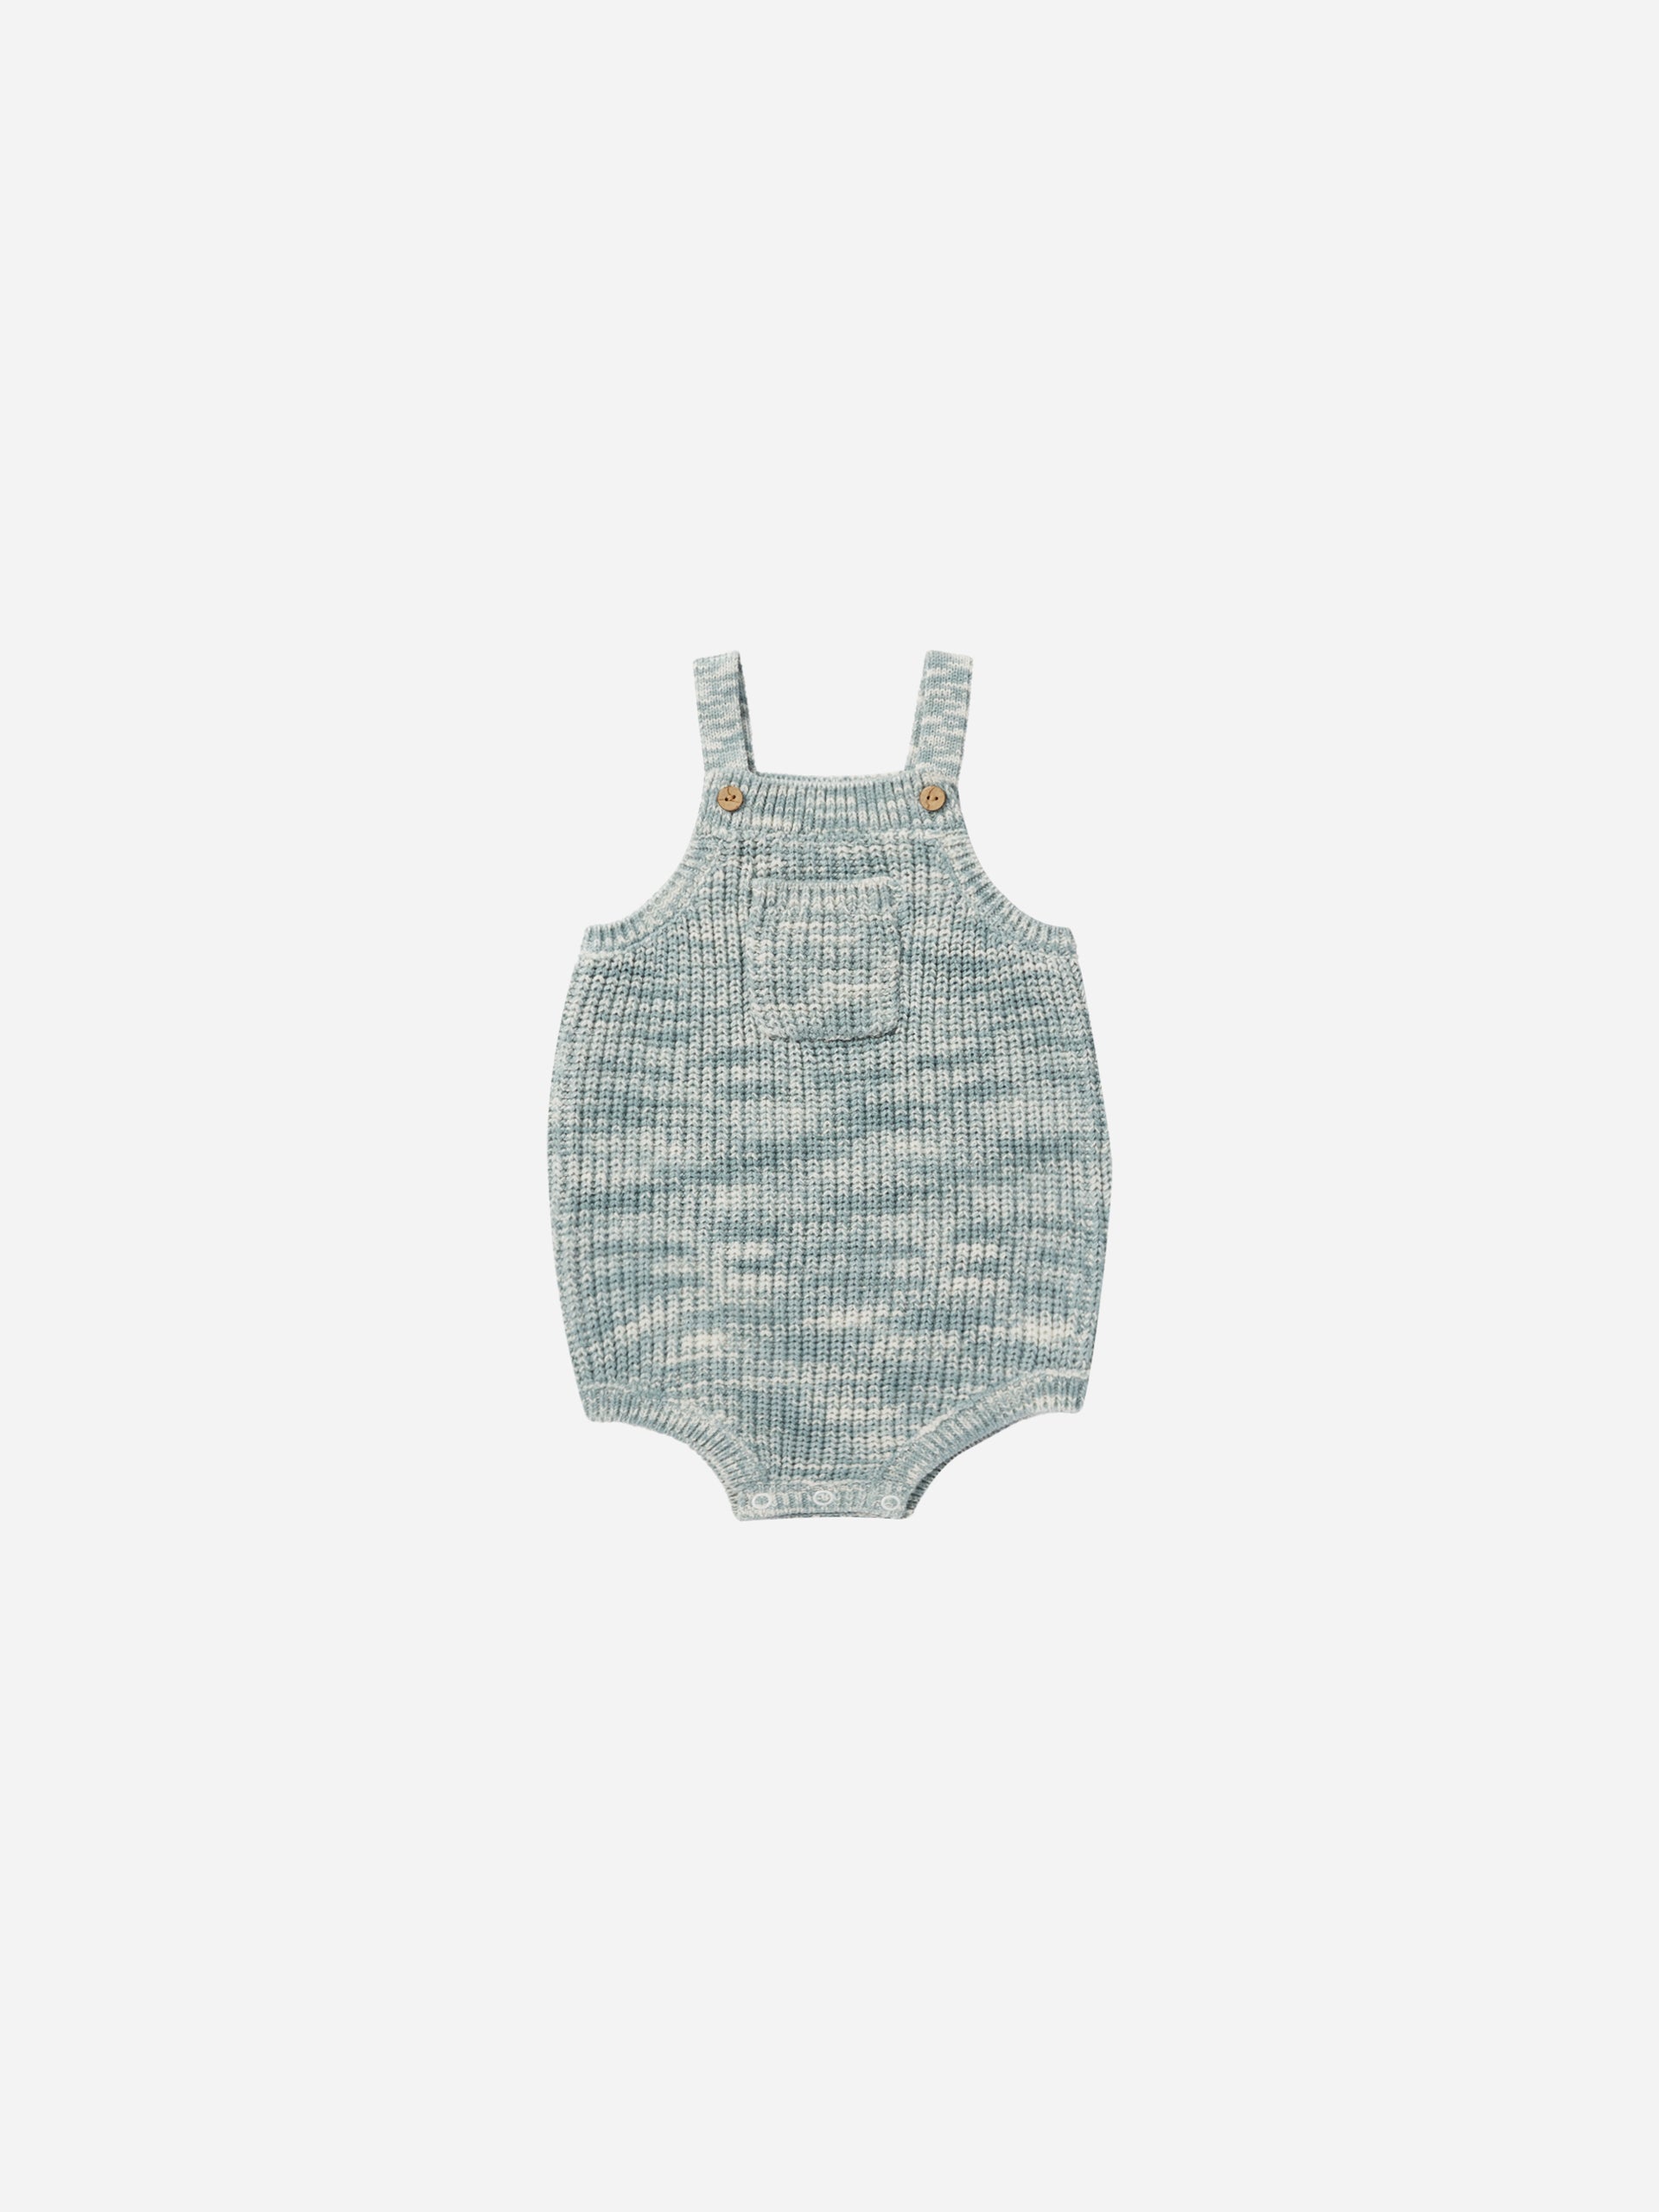 Pocketed Knit Romper || Heathered Blue - Rylee + Cru | Kids Clothes | Trendy Baby Clothes | Modern Infant Outfits |